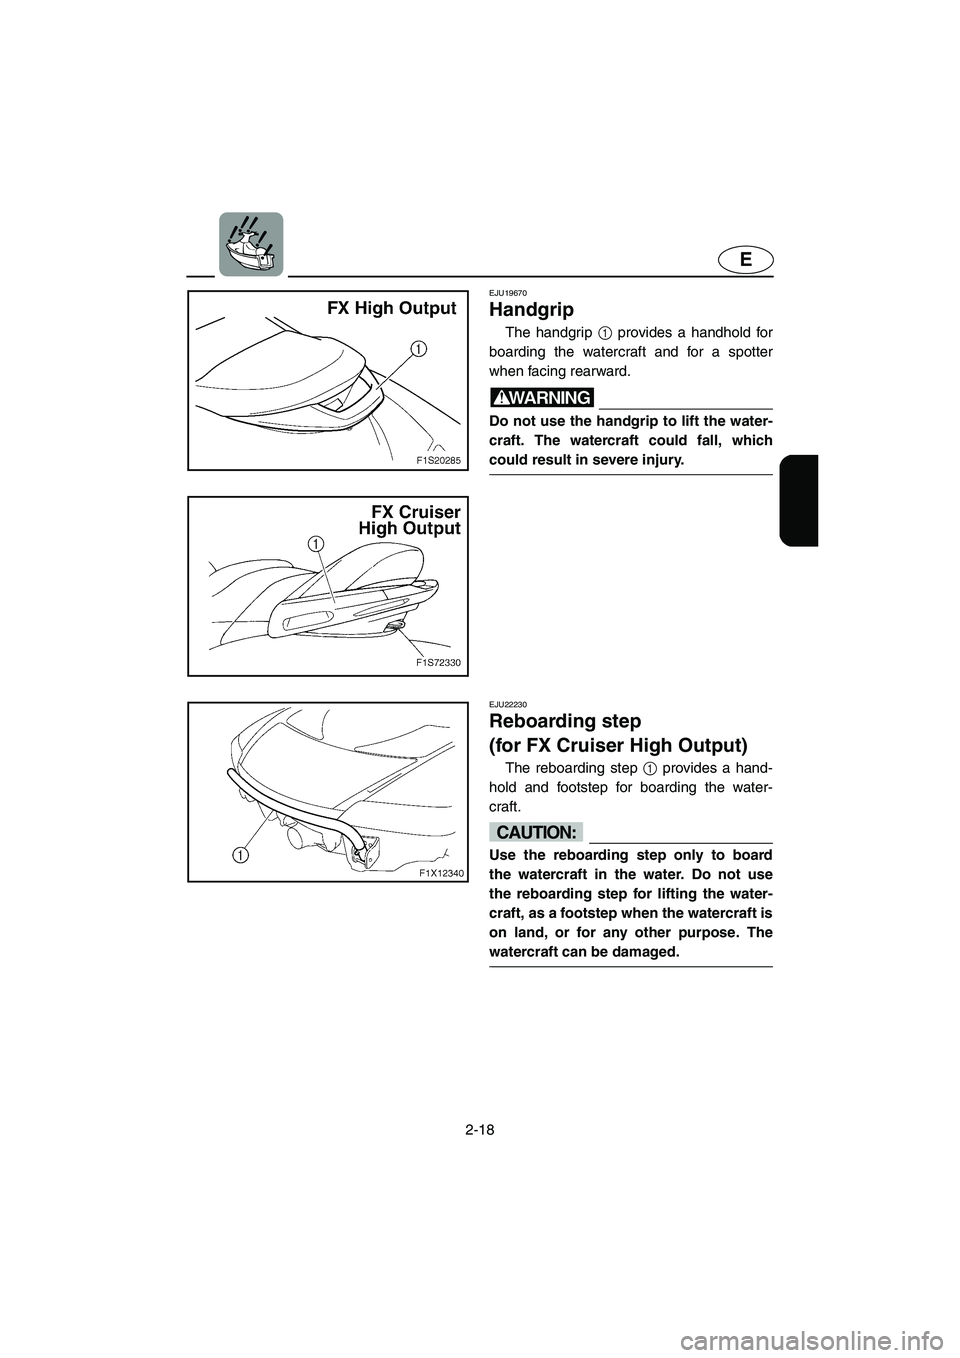 YAMAHA FX HO 2006  Owners Manual 2-18
E
EJU19670 
Handgrip 
The handgrip 1 provides a handhold for
boarding the watercraft and for a spotter
when facing rearward.
WARNING@ Do not use the handgrip to lift the water-
craft. The watercr